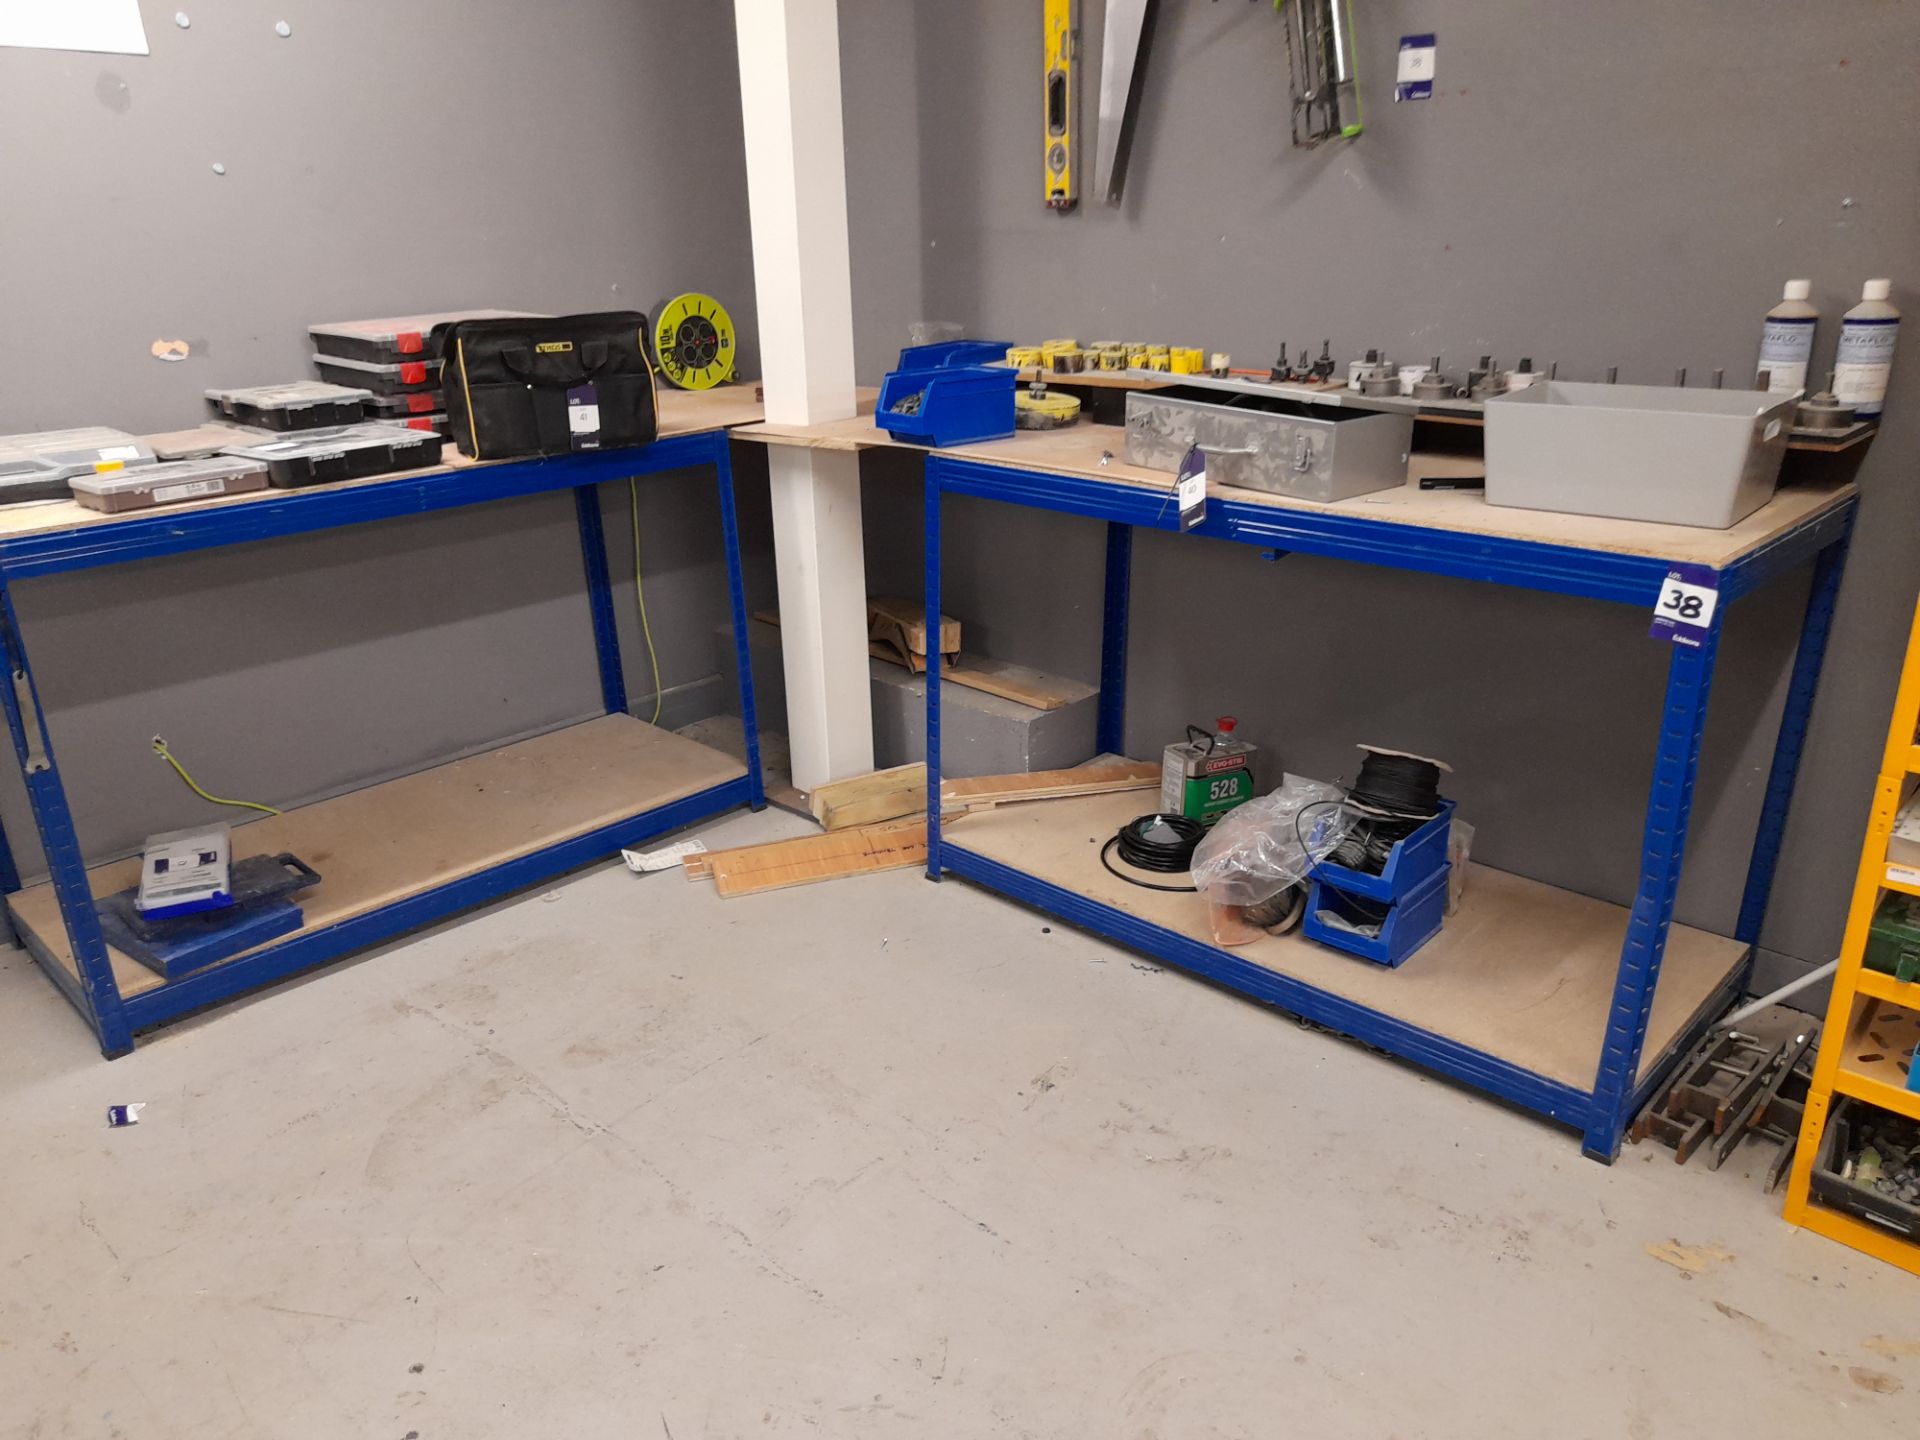 2 x Workbenches, including quantity of tools to wa